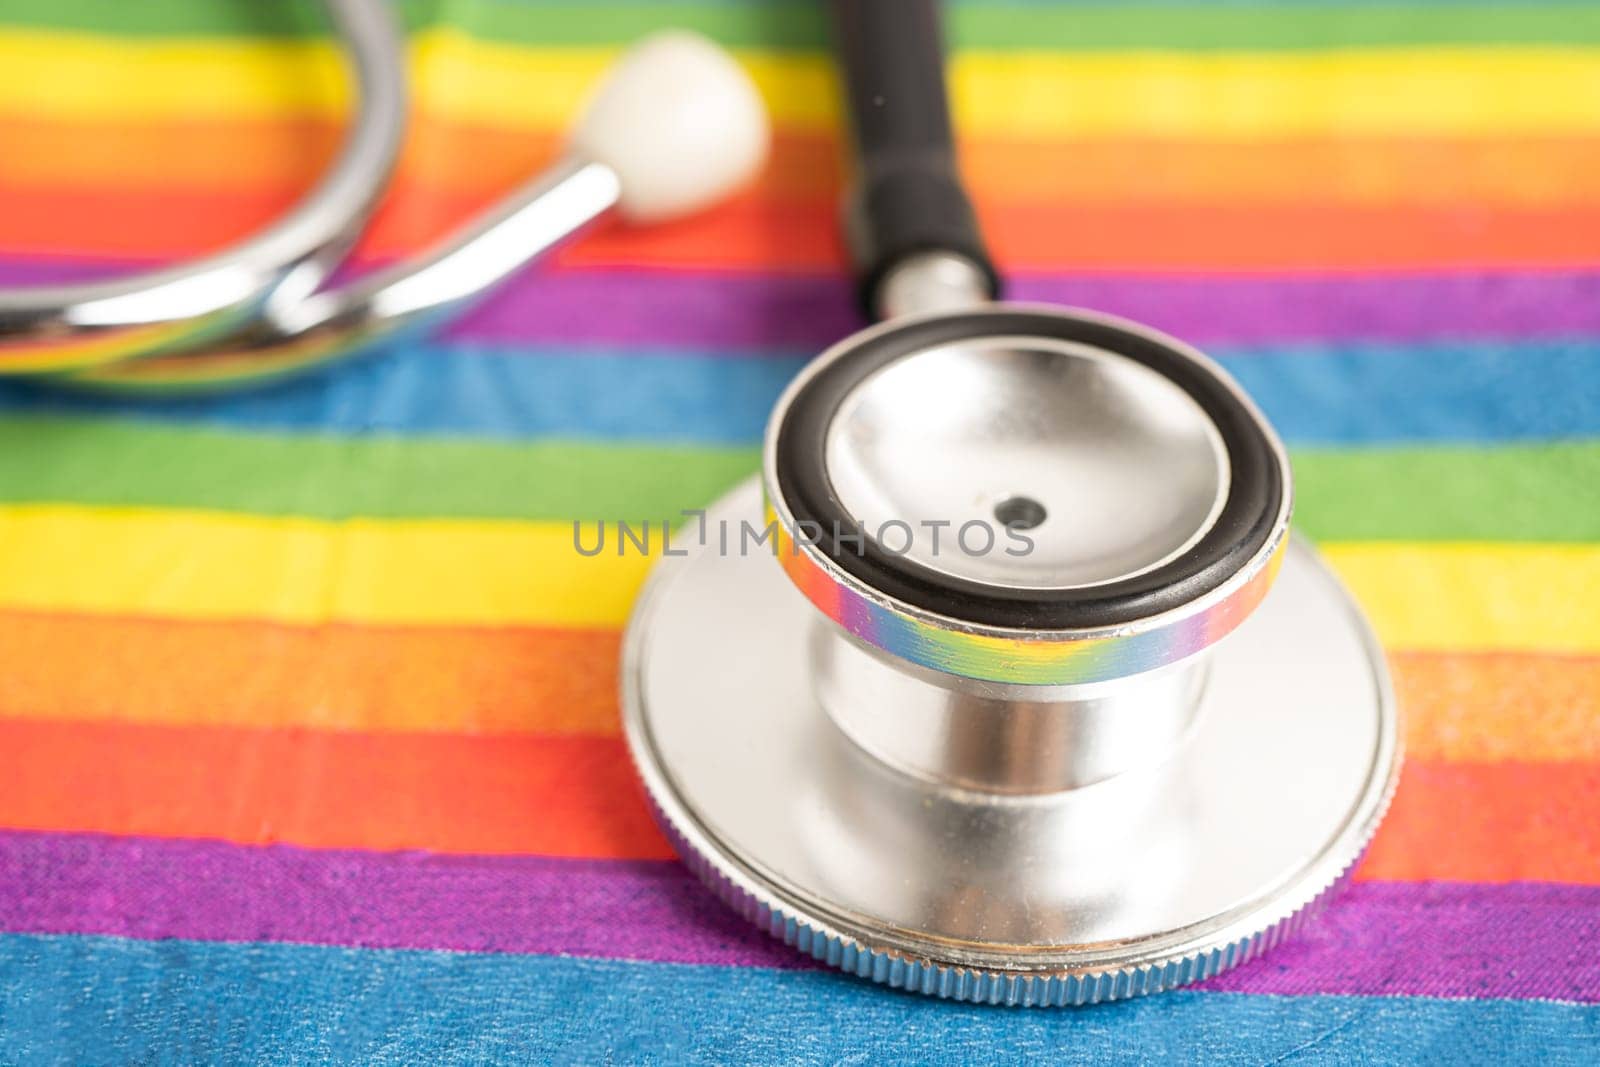 Black stethoscope on rainbow flag, symbol of LGBT pride month celebrate annual in June social, symbol of gay, lesbian, bisexual, transgender, human rights and peace. by pamai